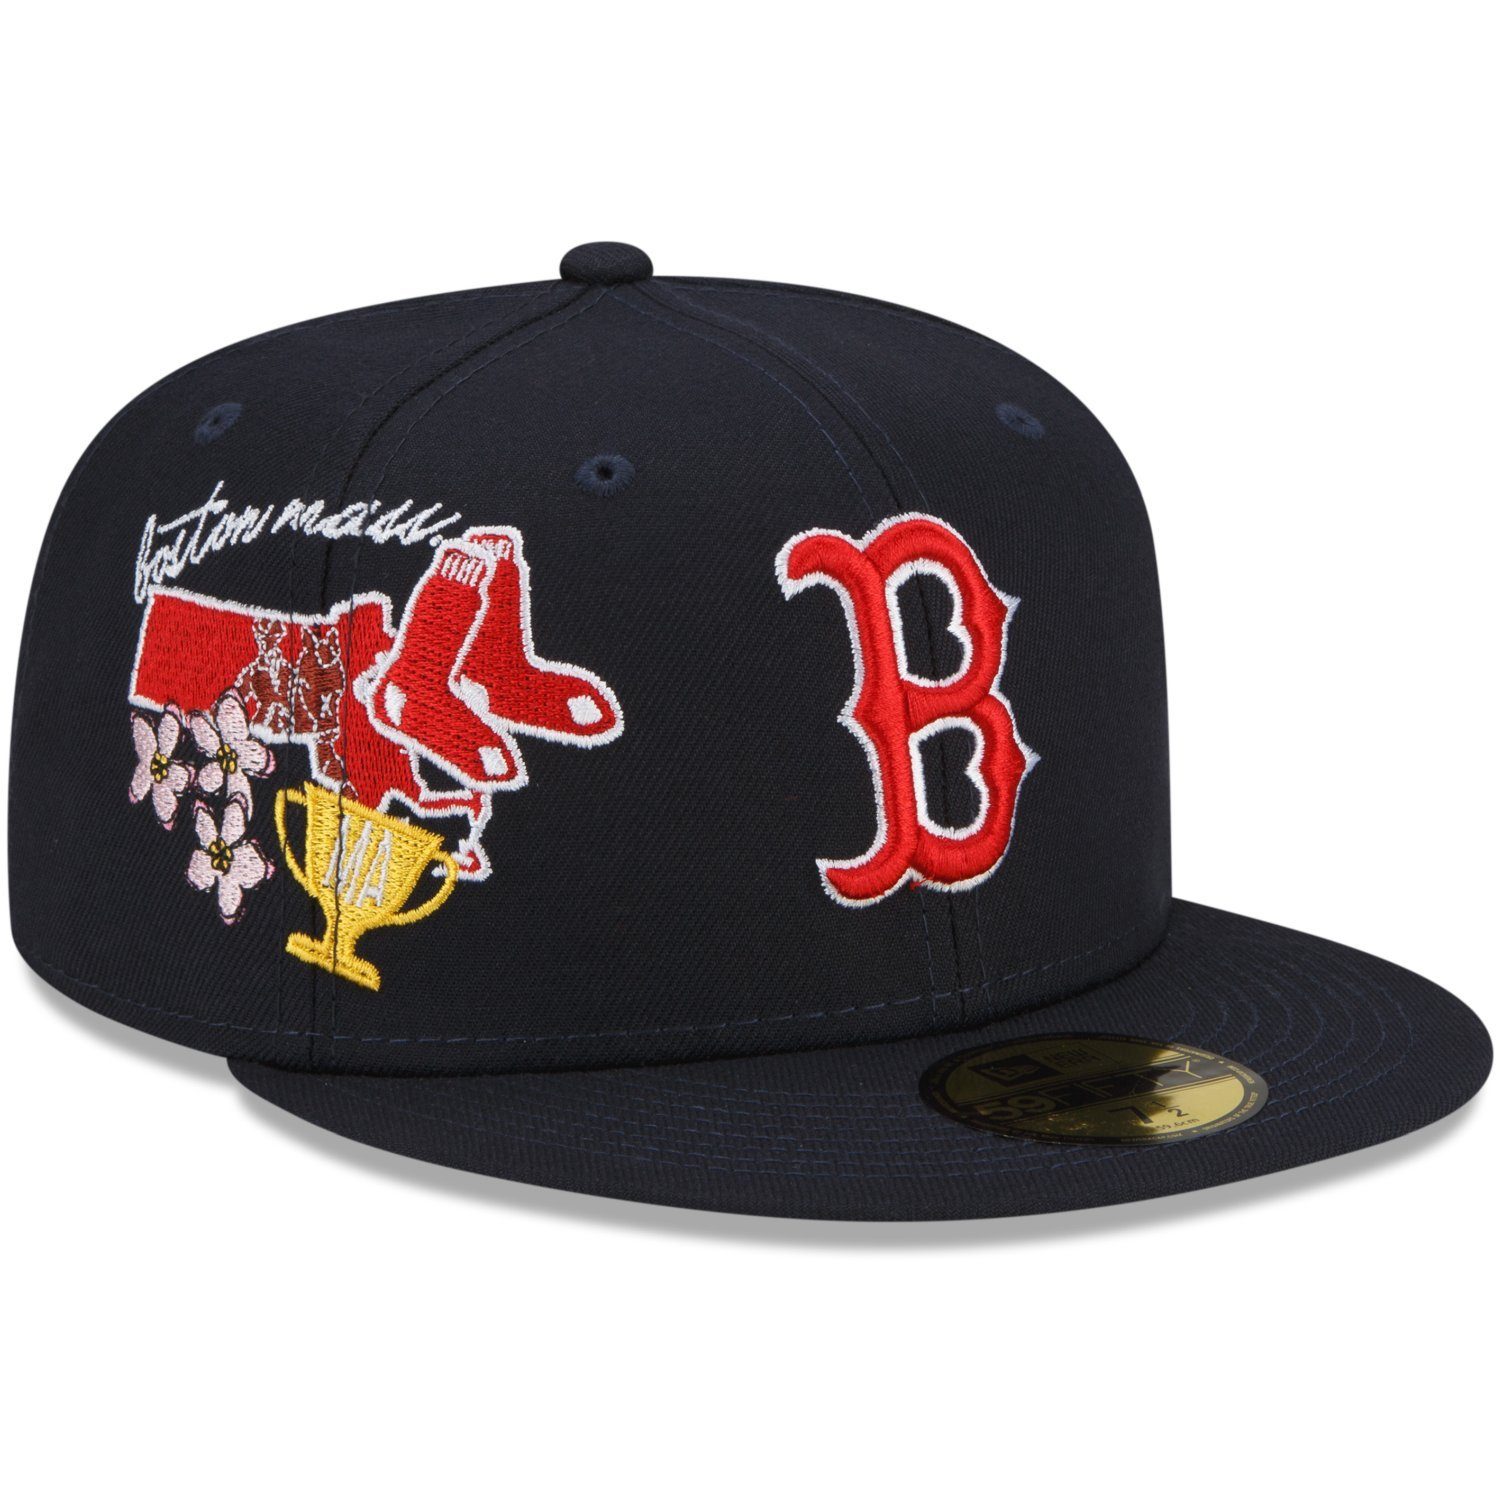 New Era Fitted Cap 59Fifty CITY CLUSTER Boston Red Sox